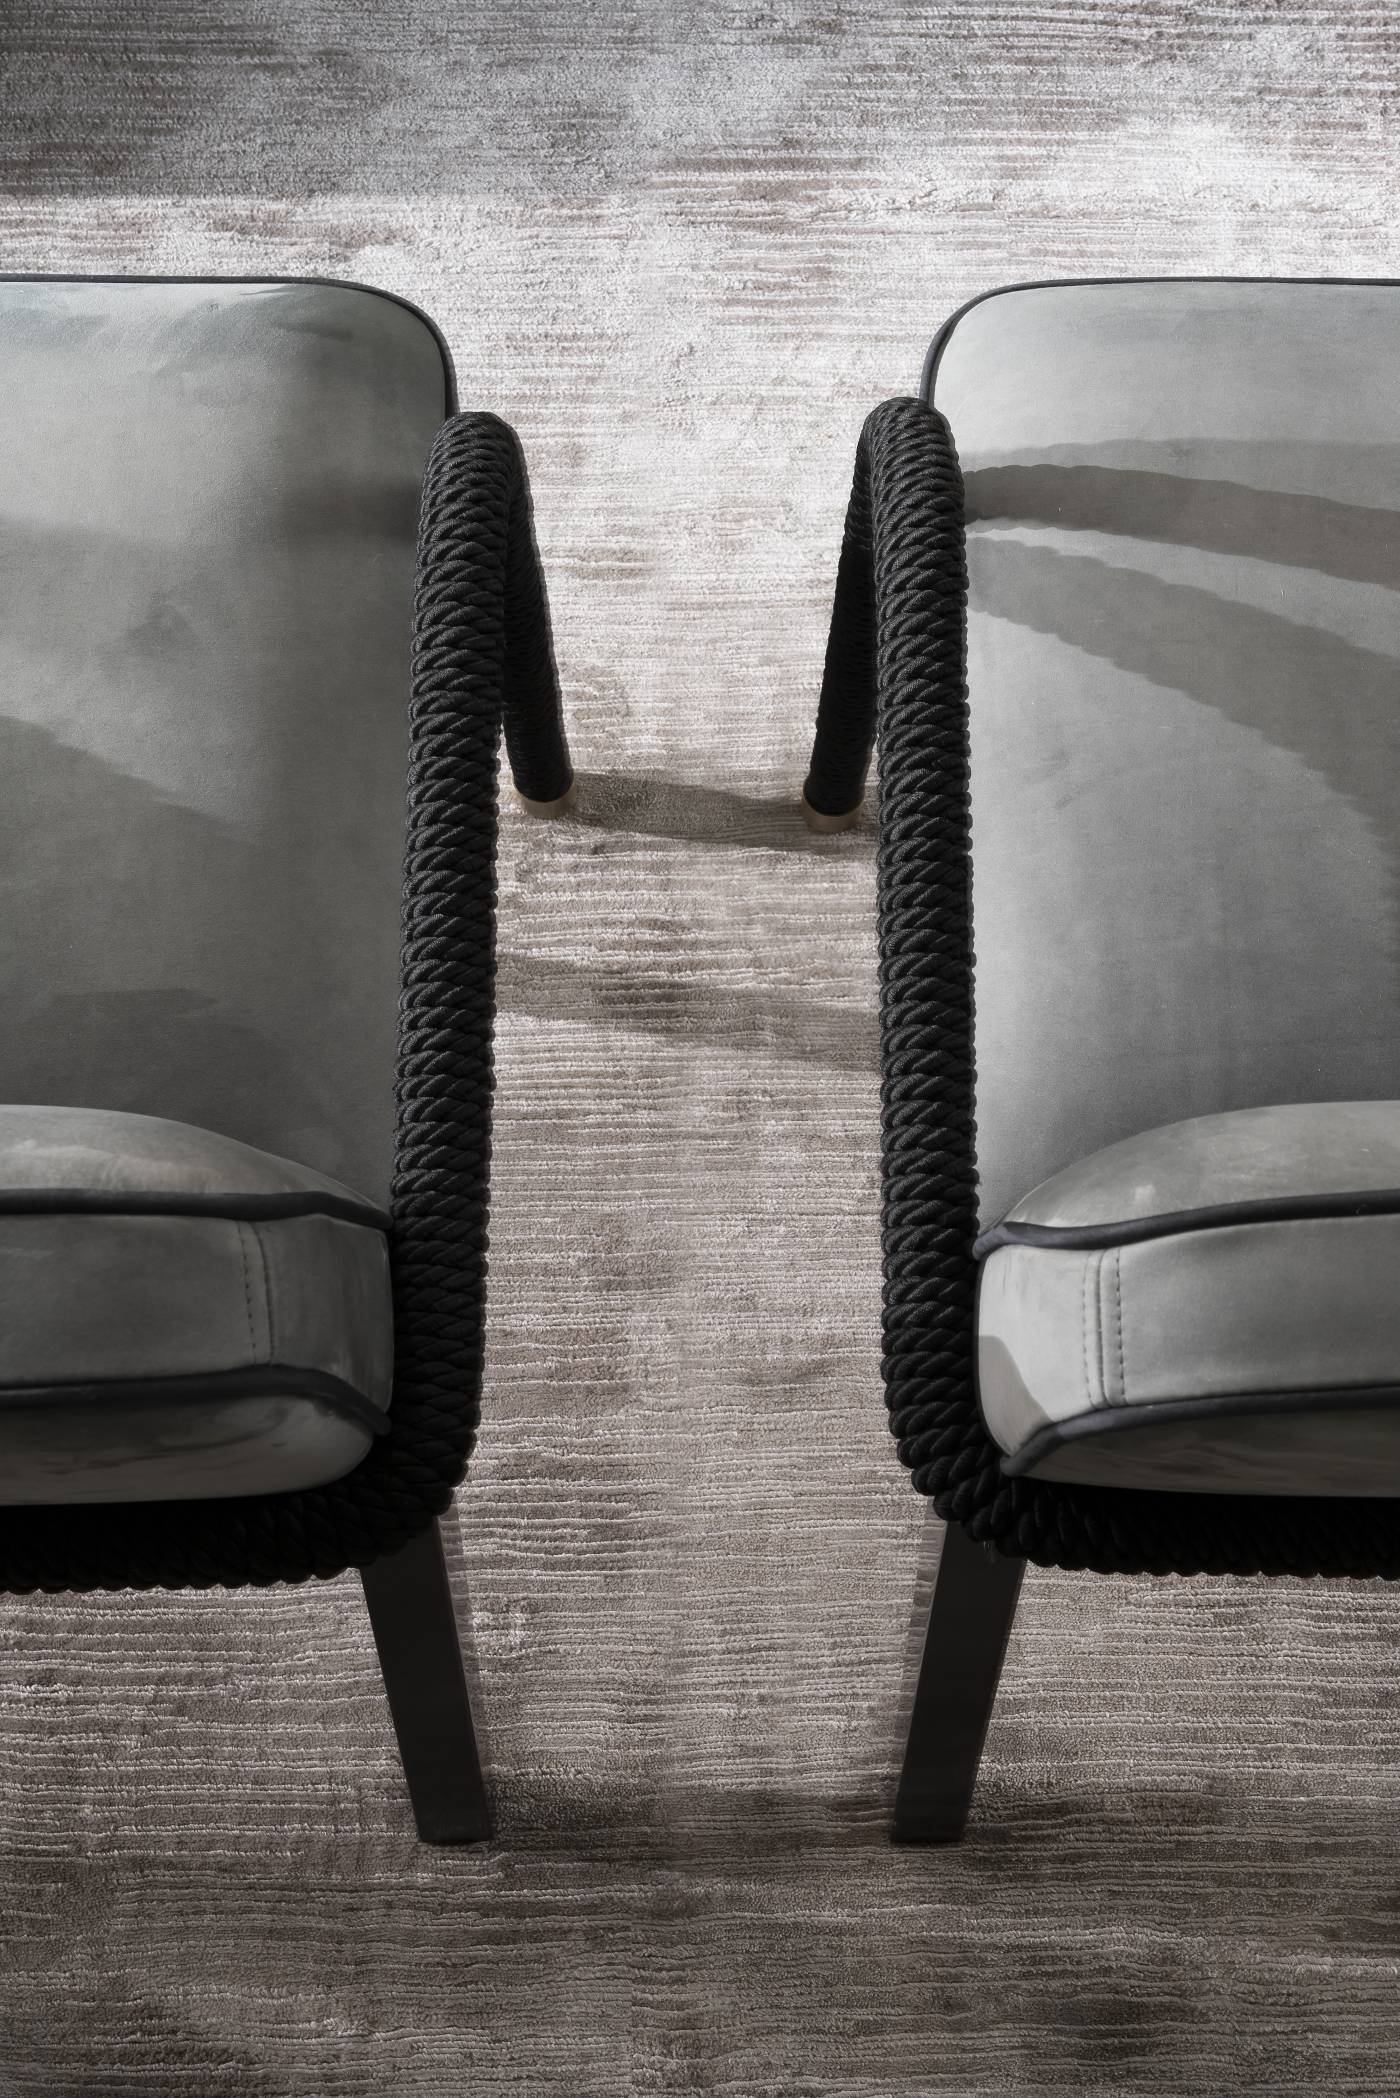 LOOP chair with armrests | Gianfranco Ferré Home Interiors